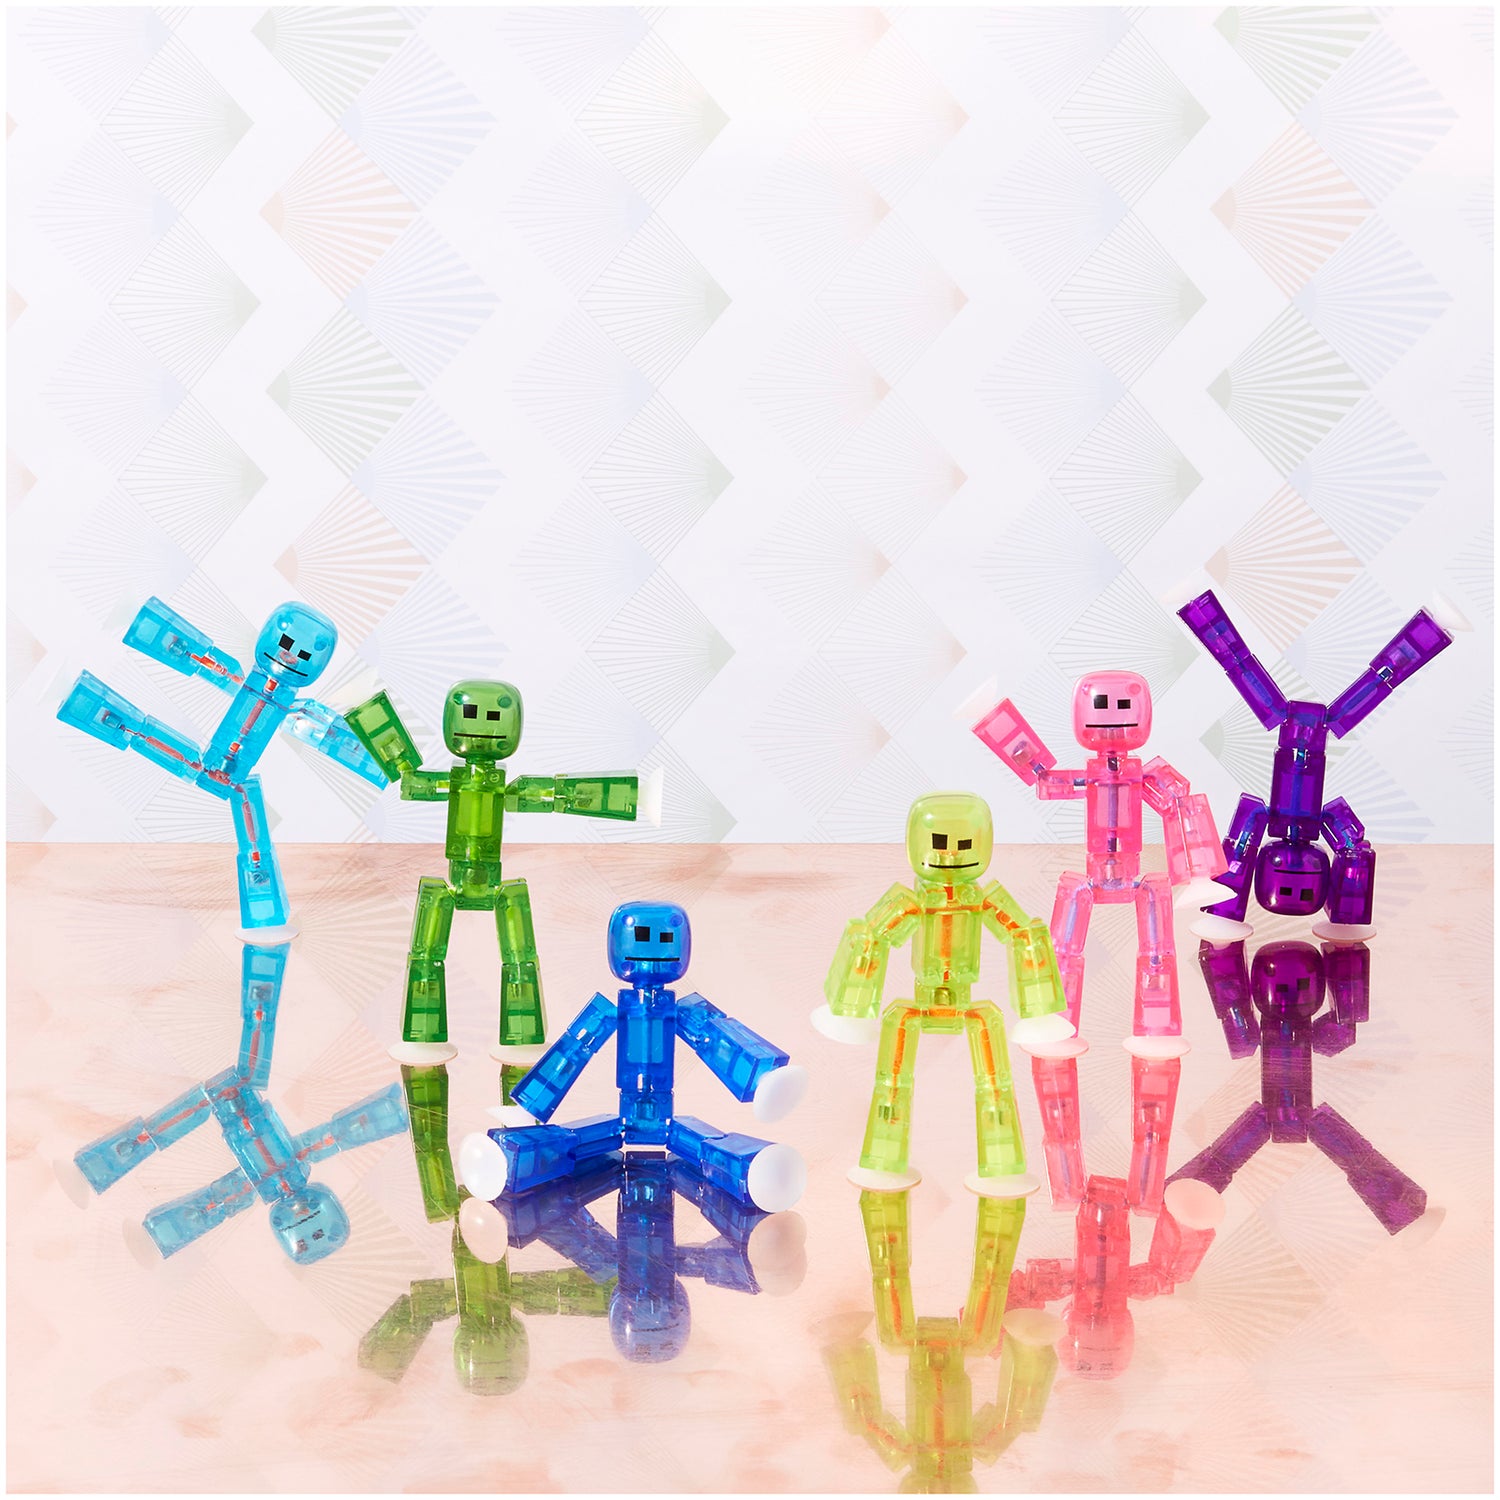 StikBot Figure Toy - 6 Pack